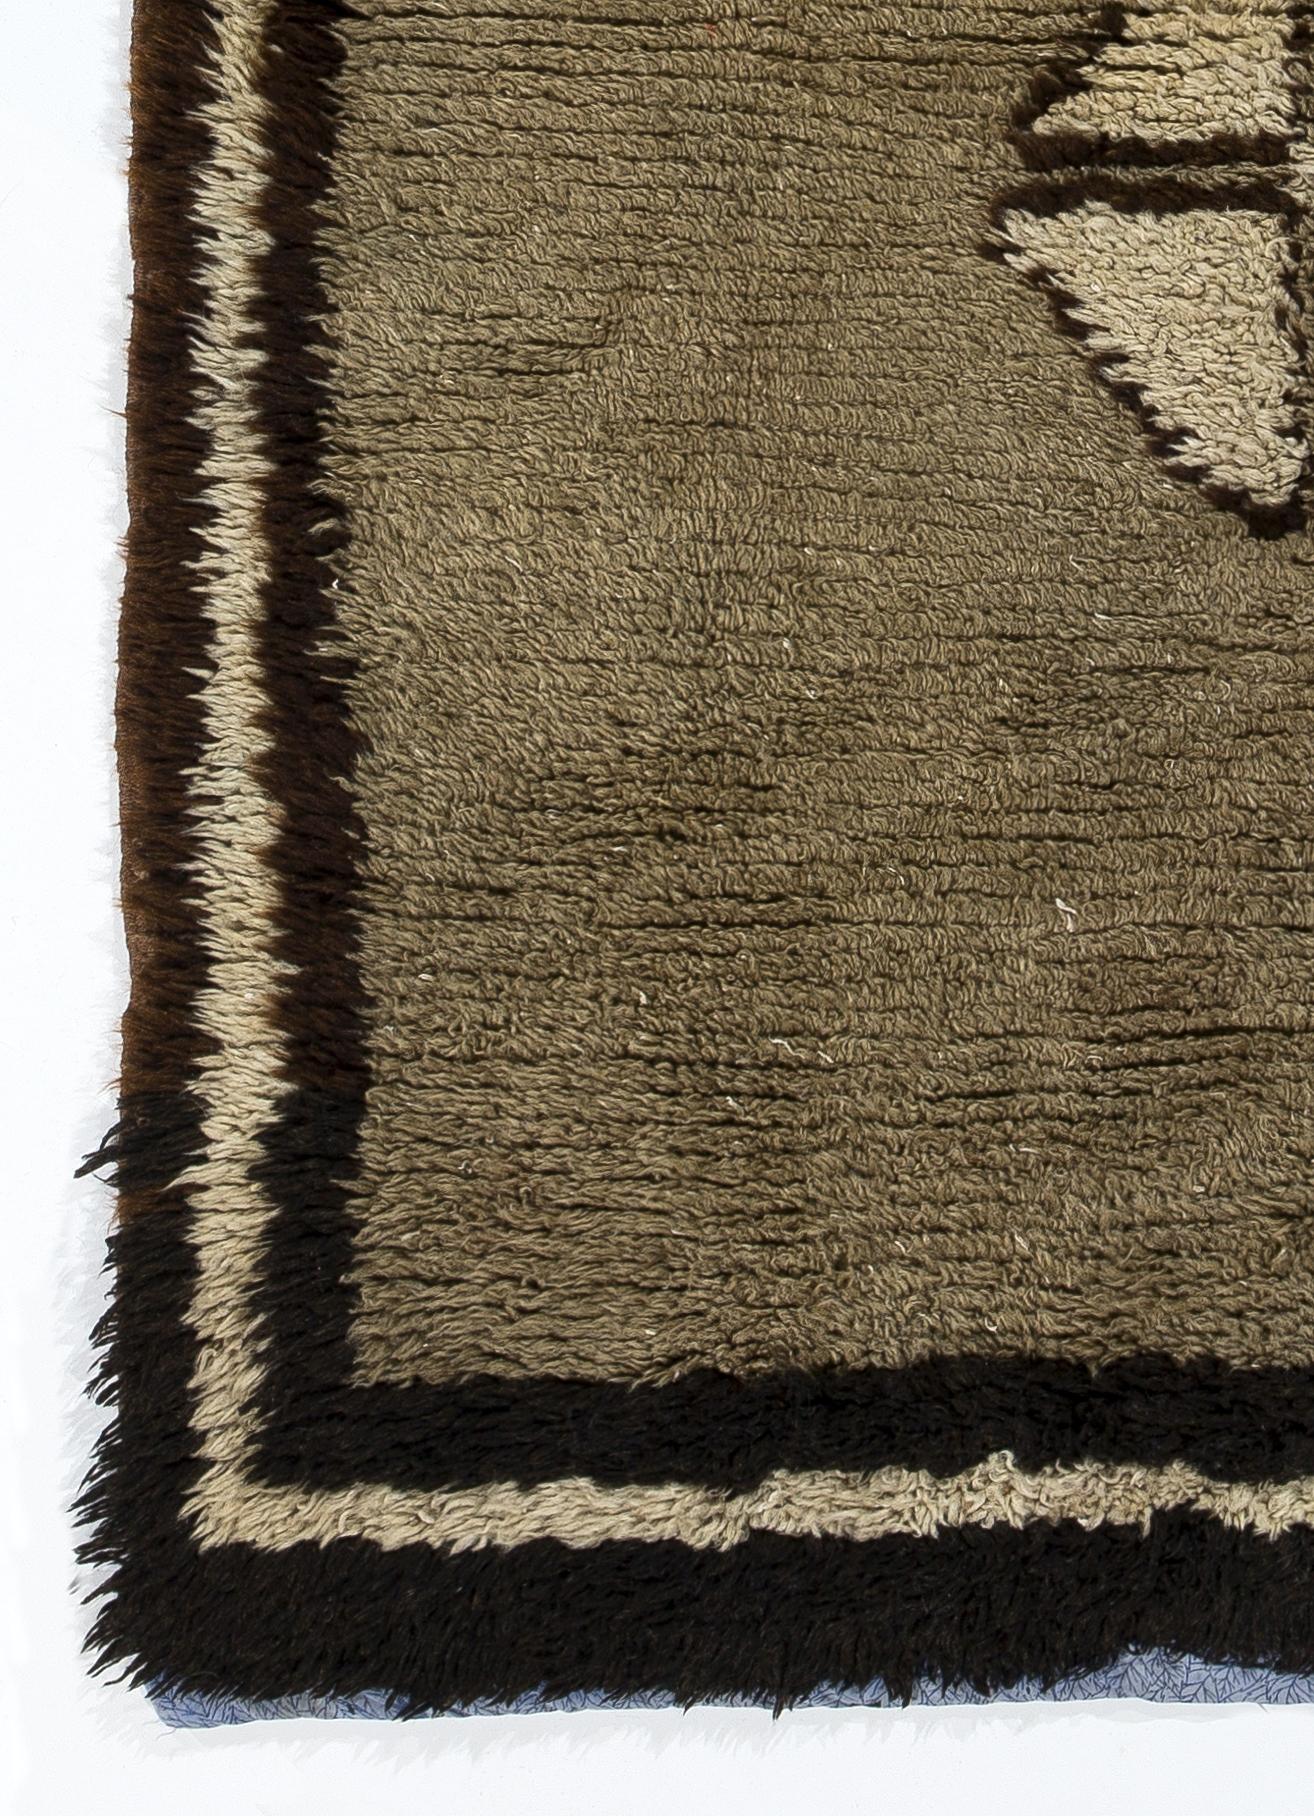 Late 20th Century 3.7x5 Ft Tulu Rug with a Four Leafed Clover. All Natural Gray, Brown, Beige Wool